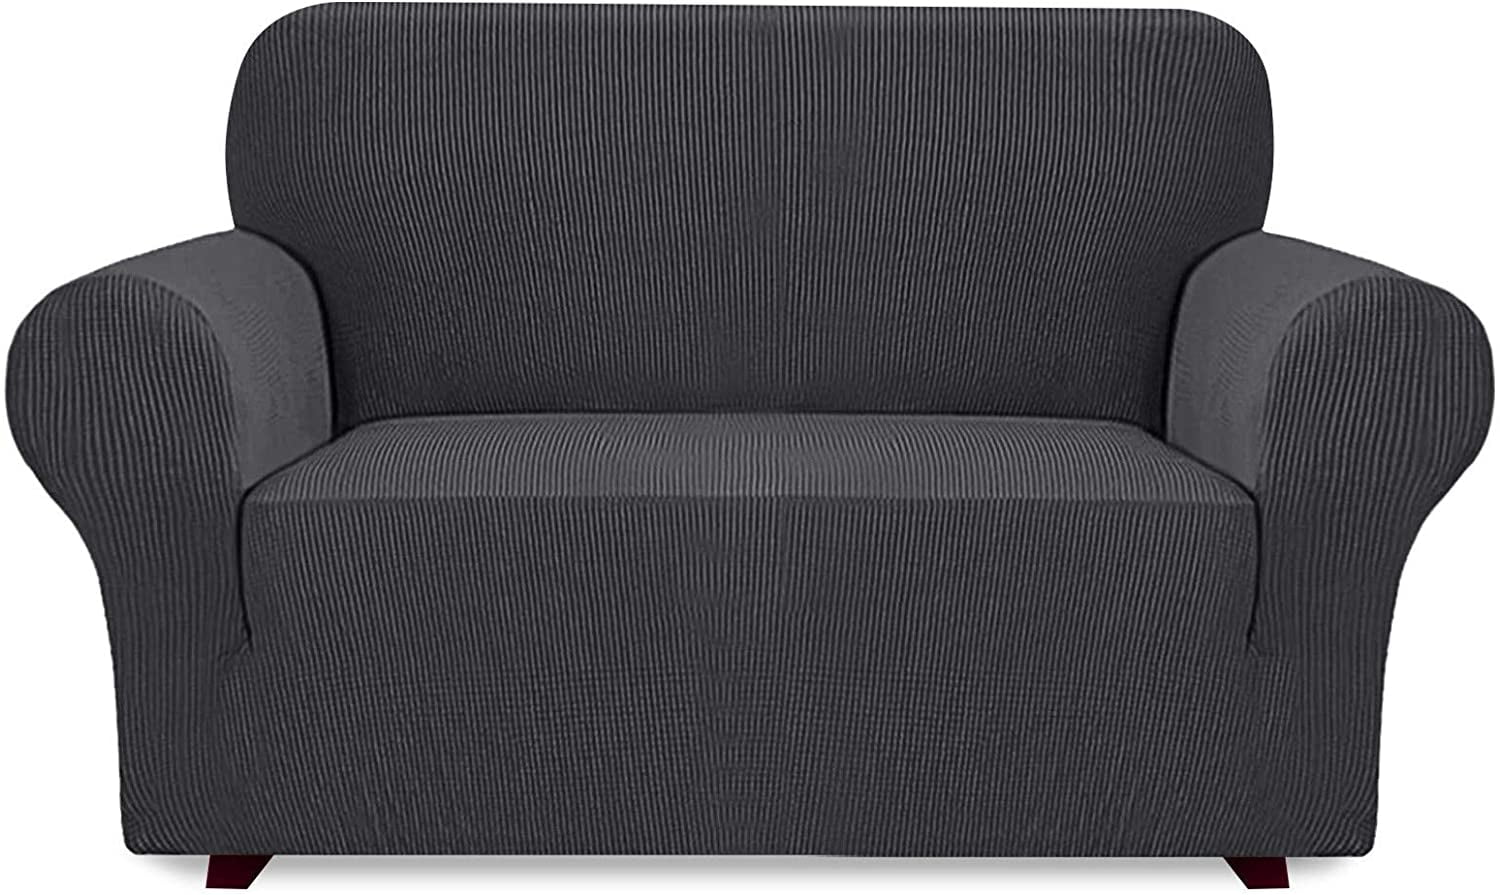 Bottom Elastic Easy to Install One Piece High Stretch Couch Cover Machine Washable Spandex Jacquard Fabric Non-Slip Furniture Protector,Grey iCOVER Loveseat Sofa Slipcover